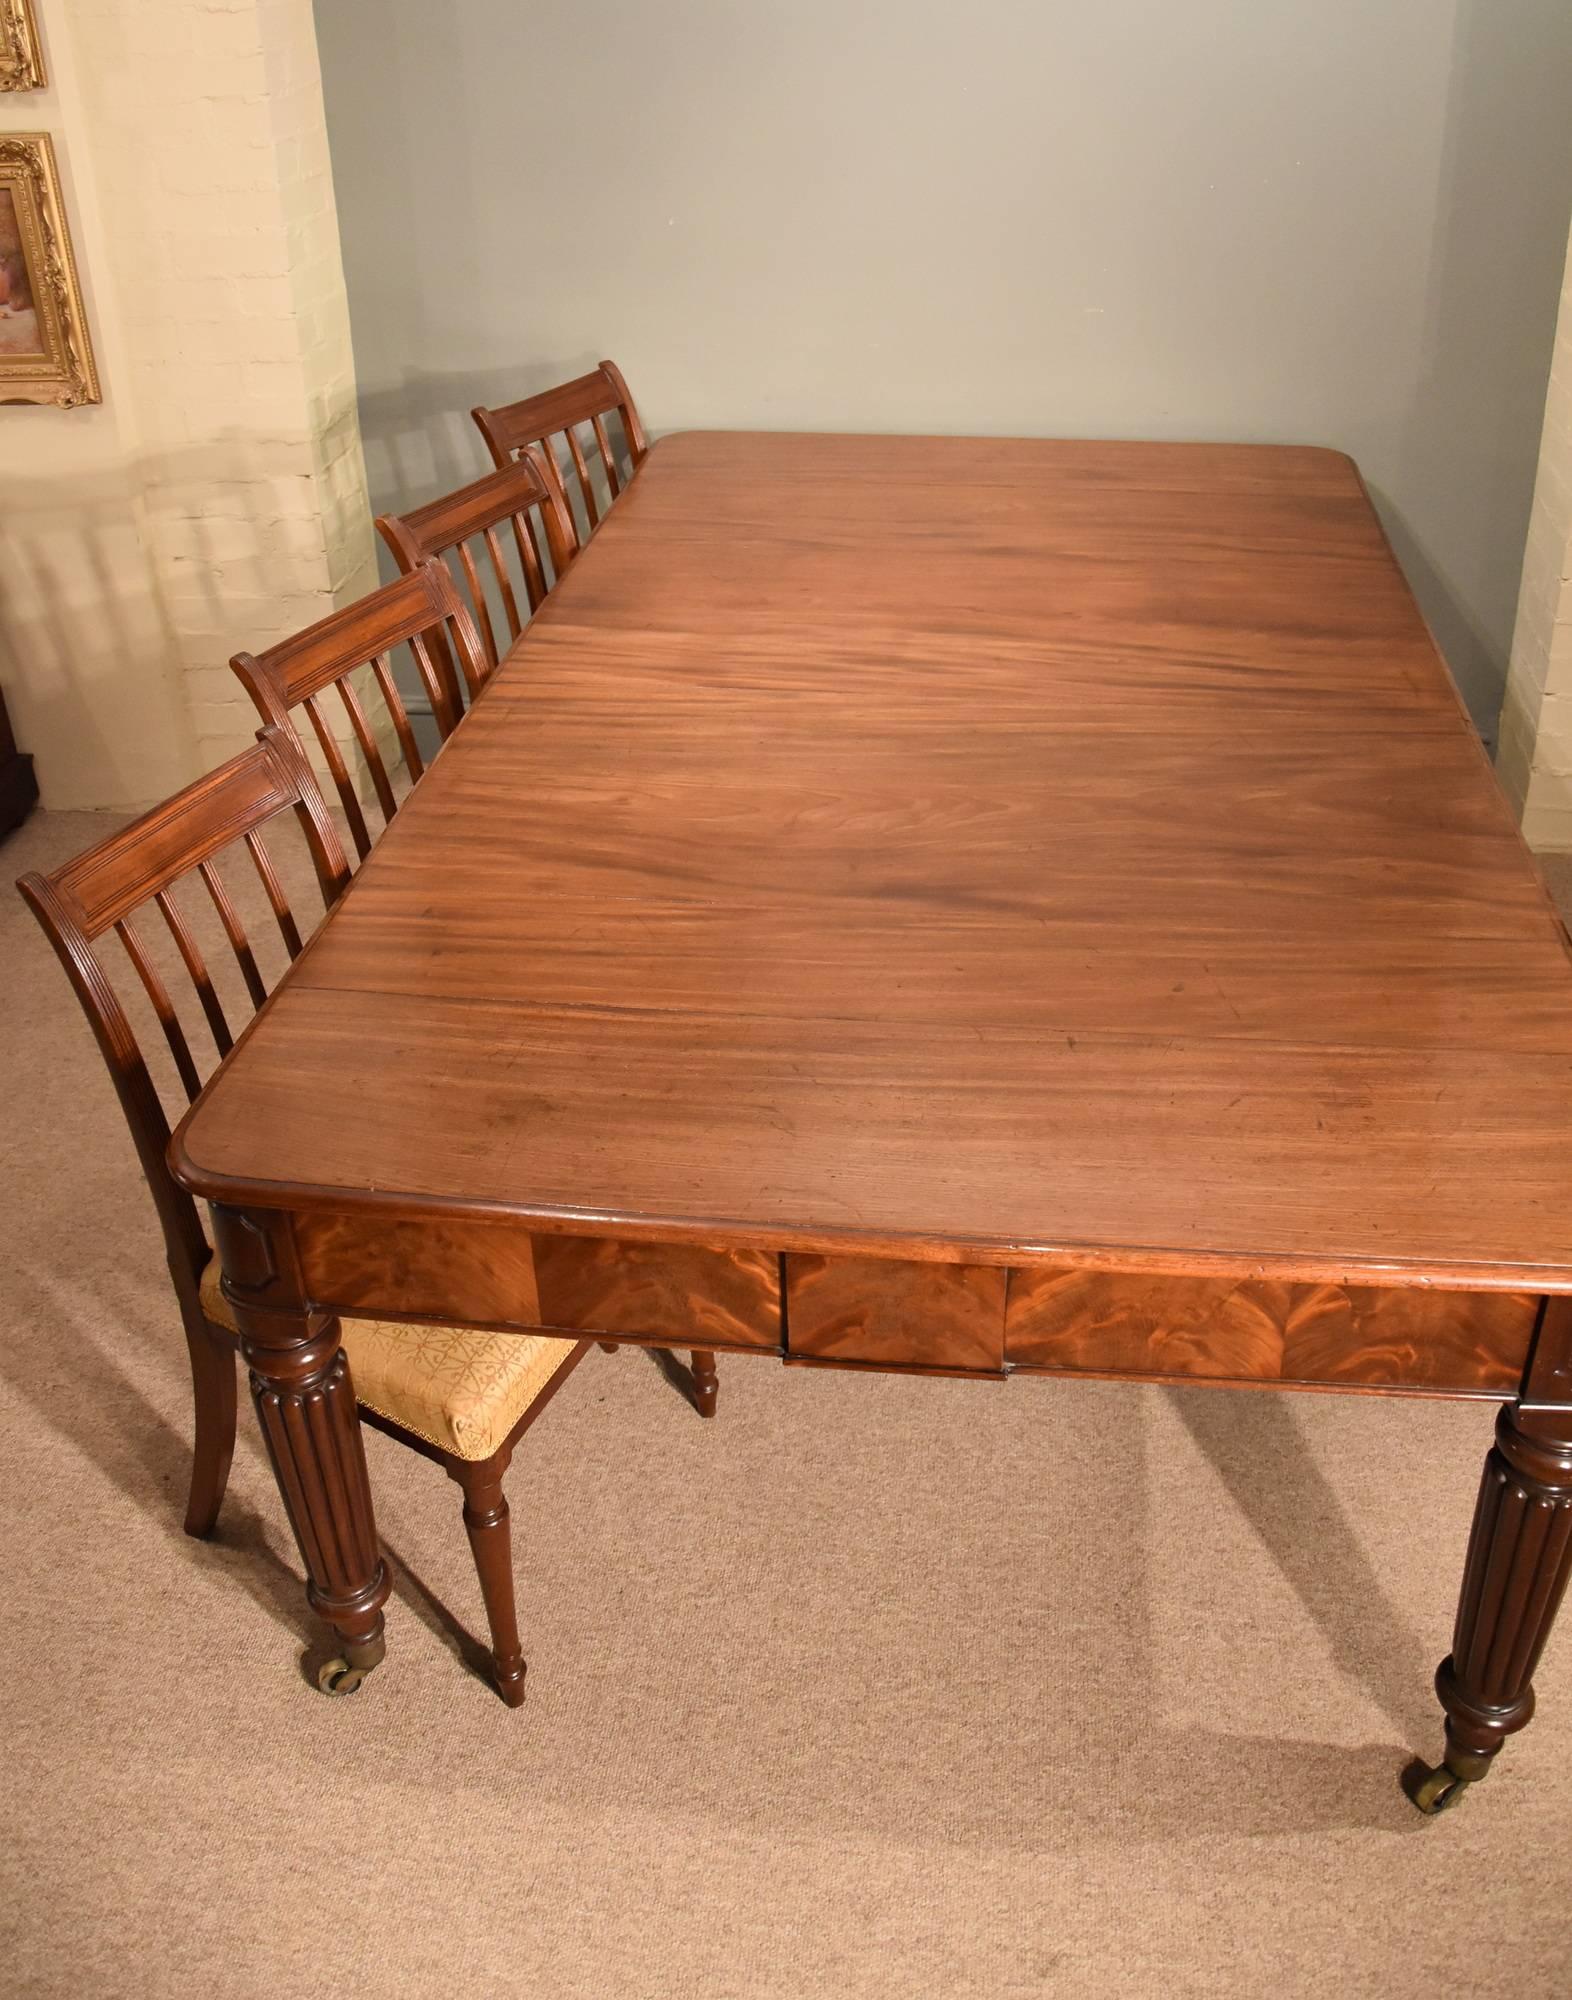 A good late Regency mahogany dining table with reeded legs and four leaves

Dimensions:
width 88.5